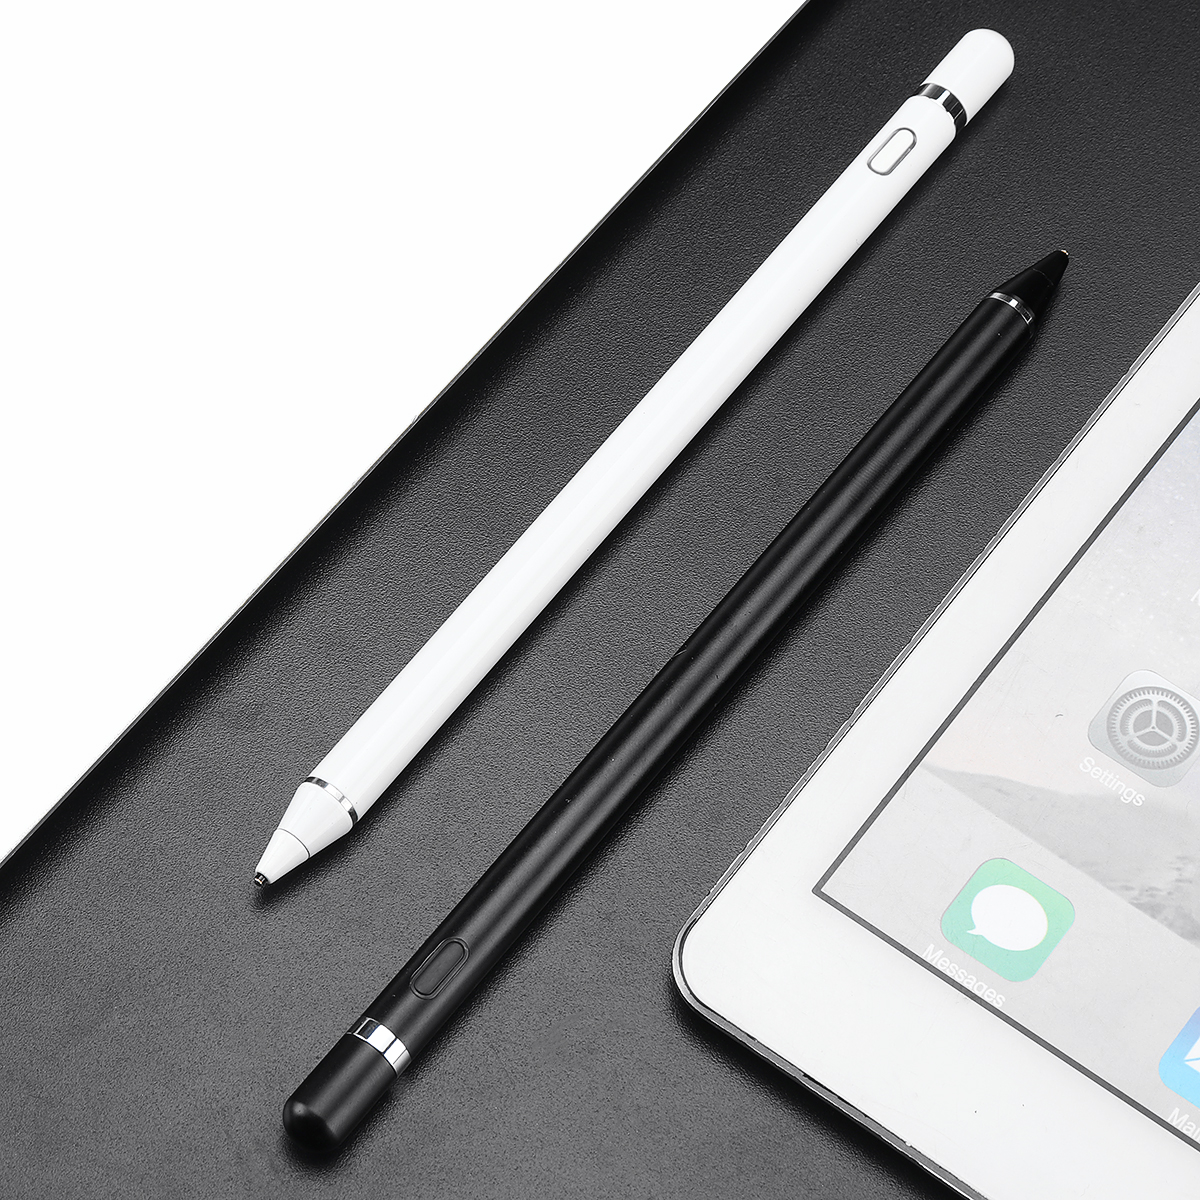 1 stylus pen for touch screens